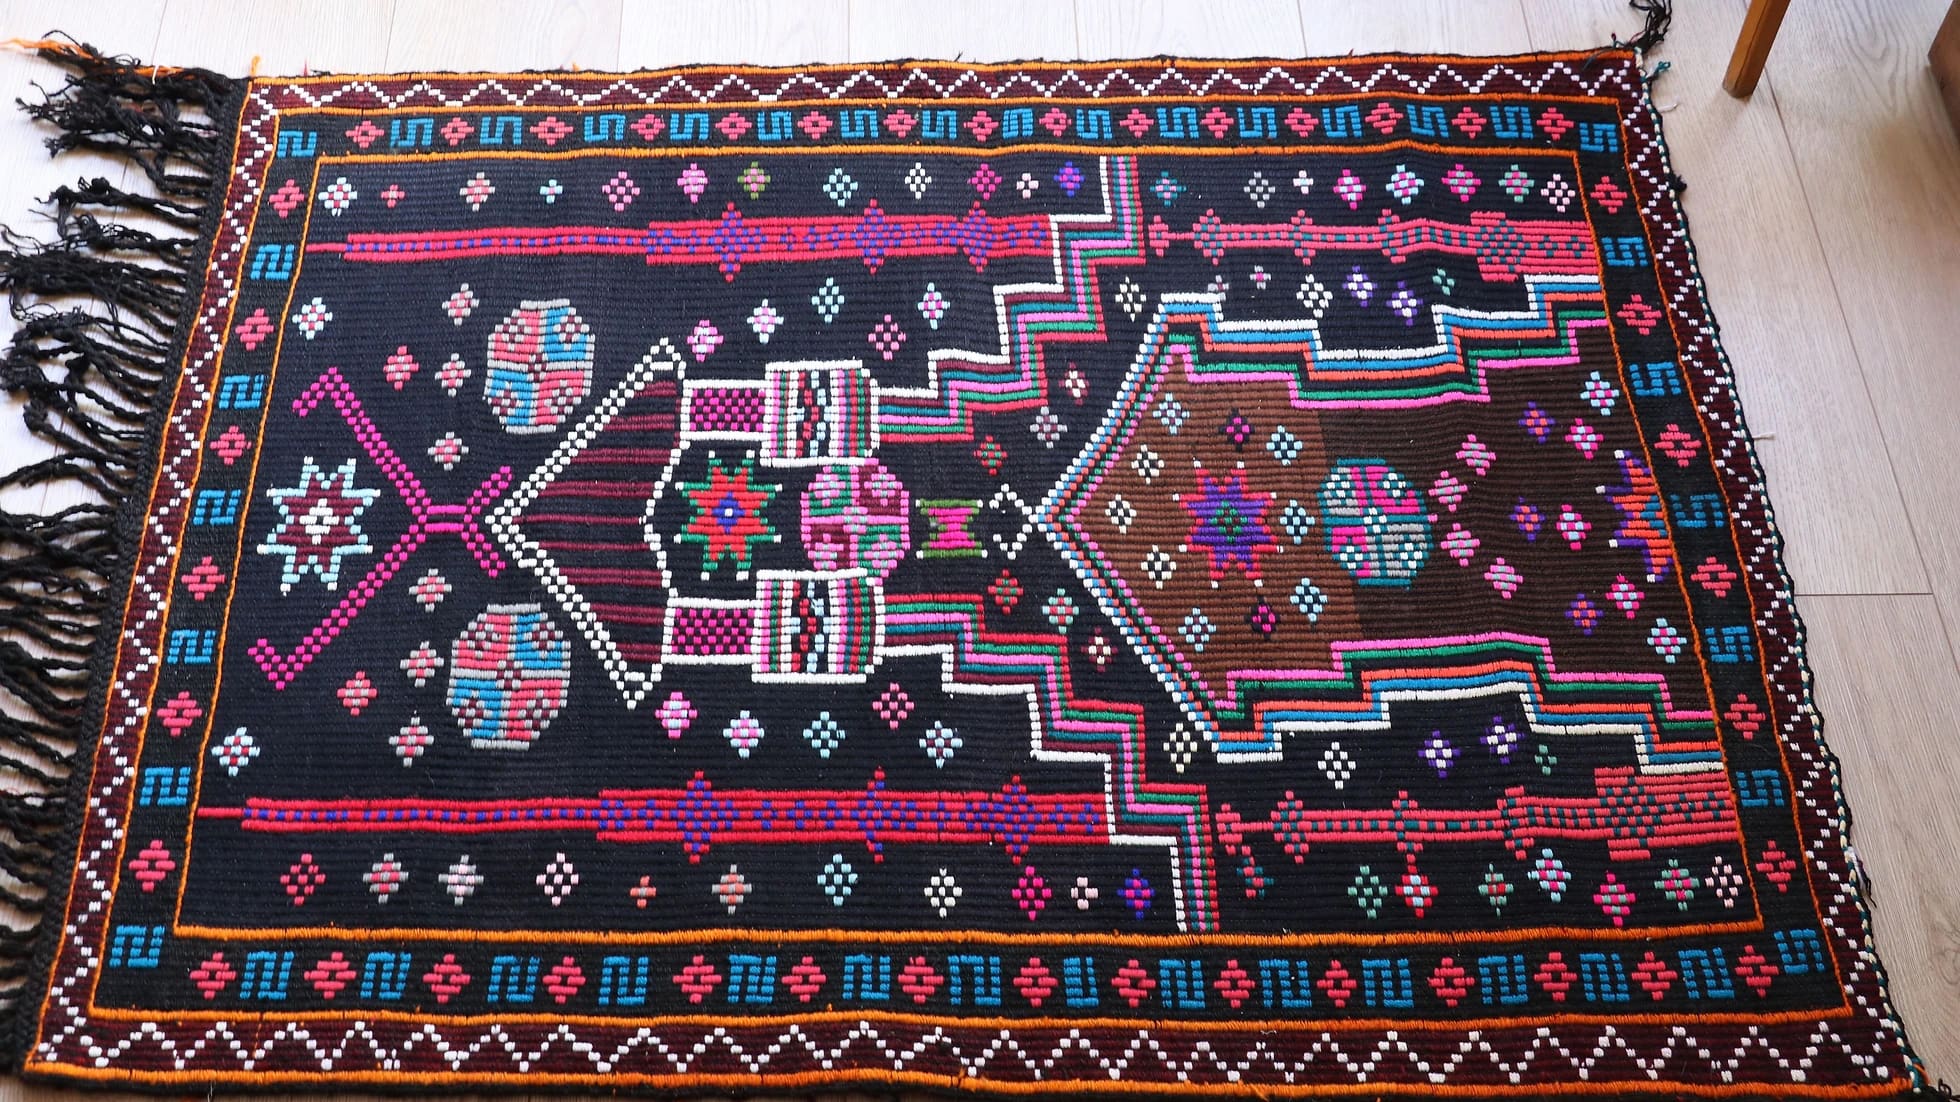 vintage handwoven Cecim Kilim prayer small area rug in gorgeous fuchsia and amethyst colors with black tassels in detail